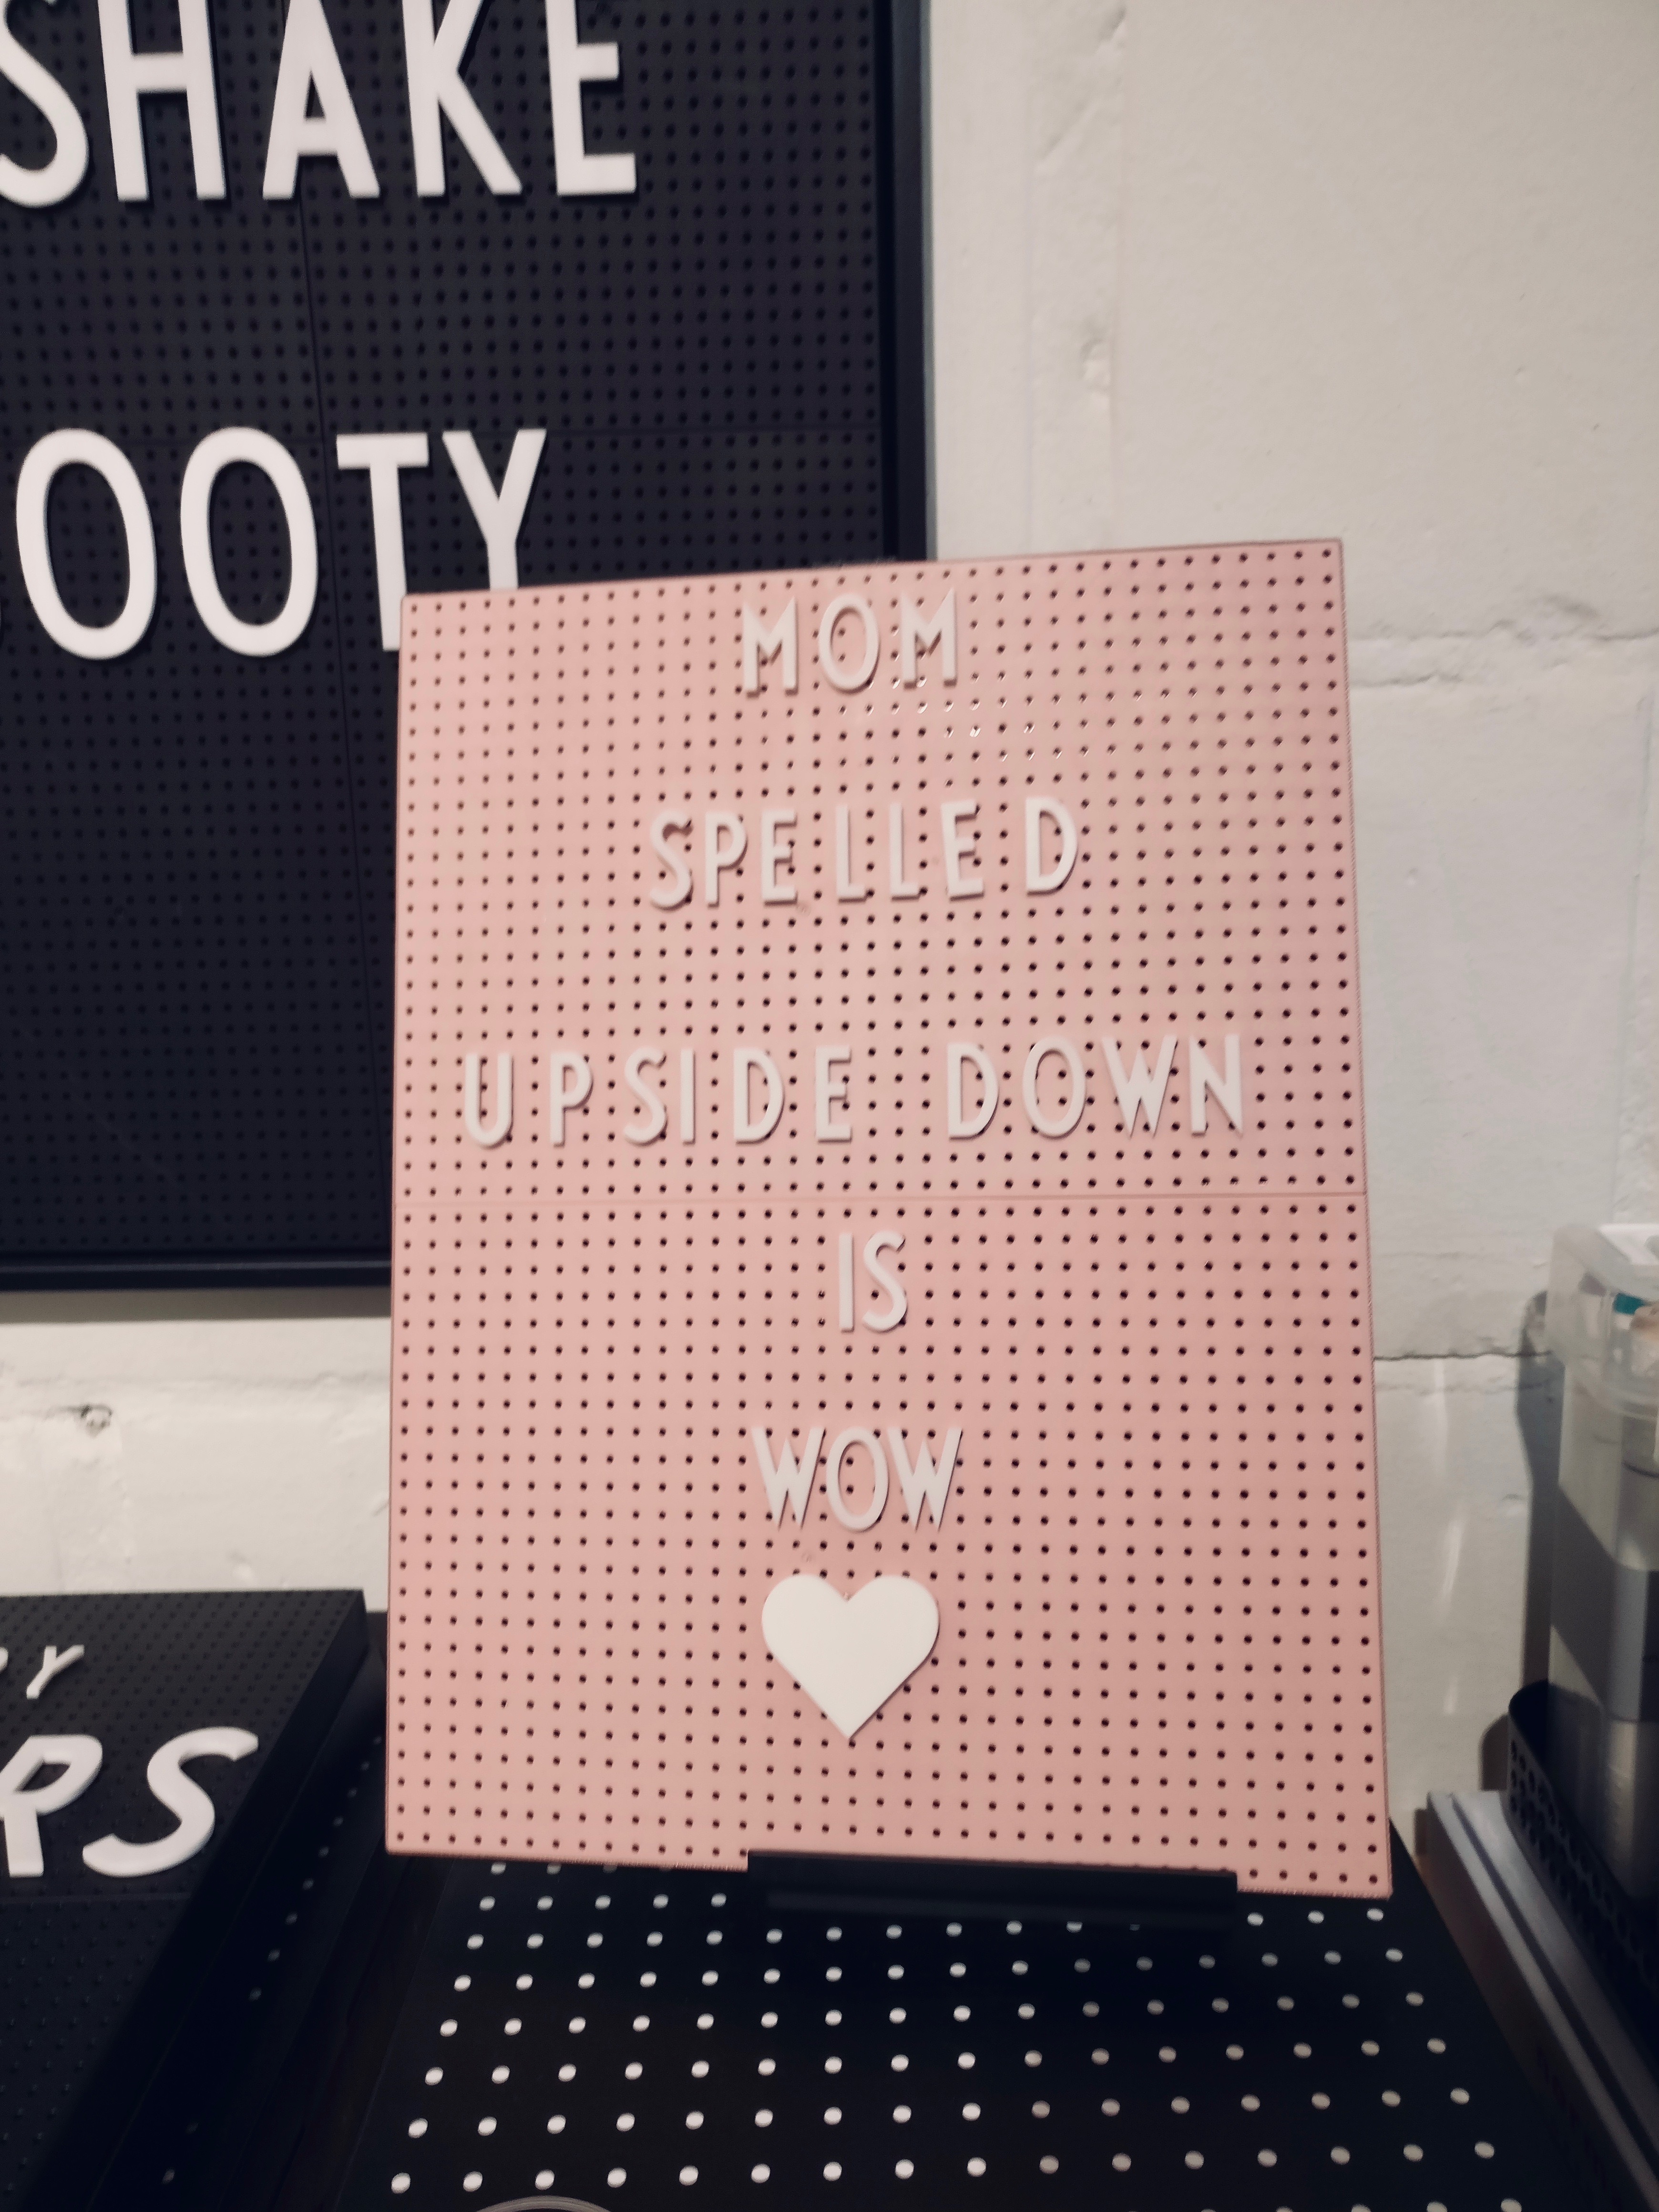 A pegboard reads "Mom spelled upside down is wow"